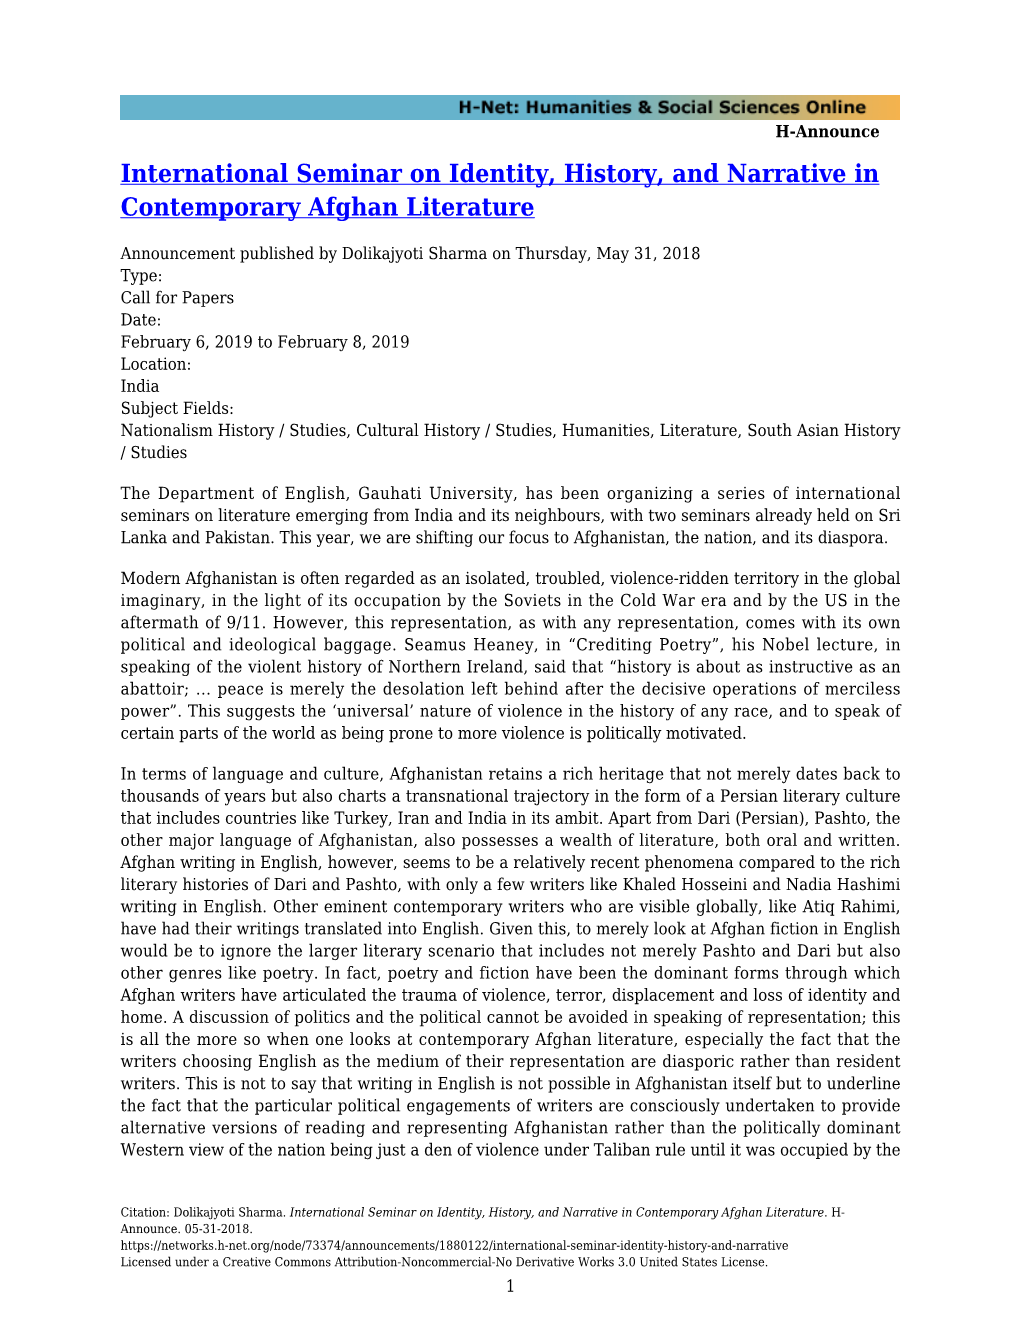 International Seminar on Identity, History, and Narrative in Contemporary Afghan Literature